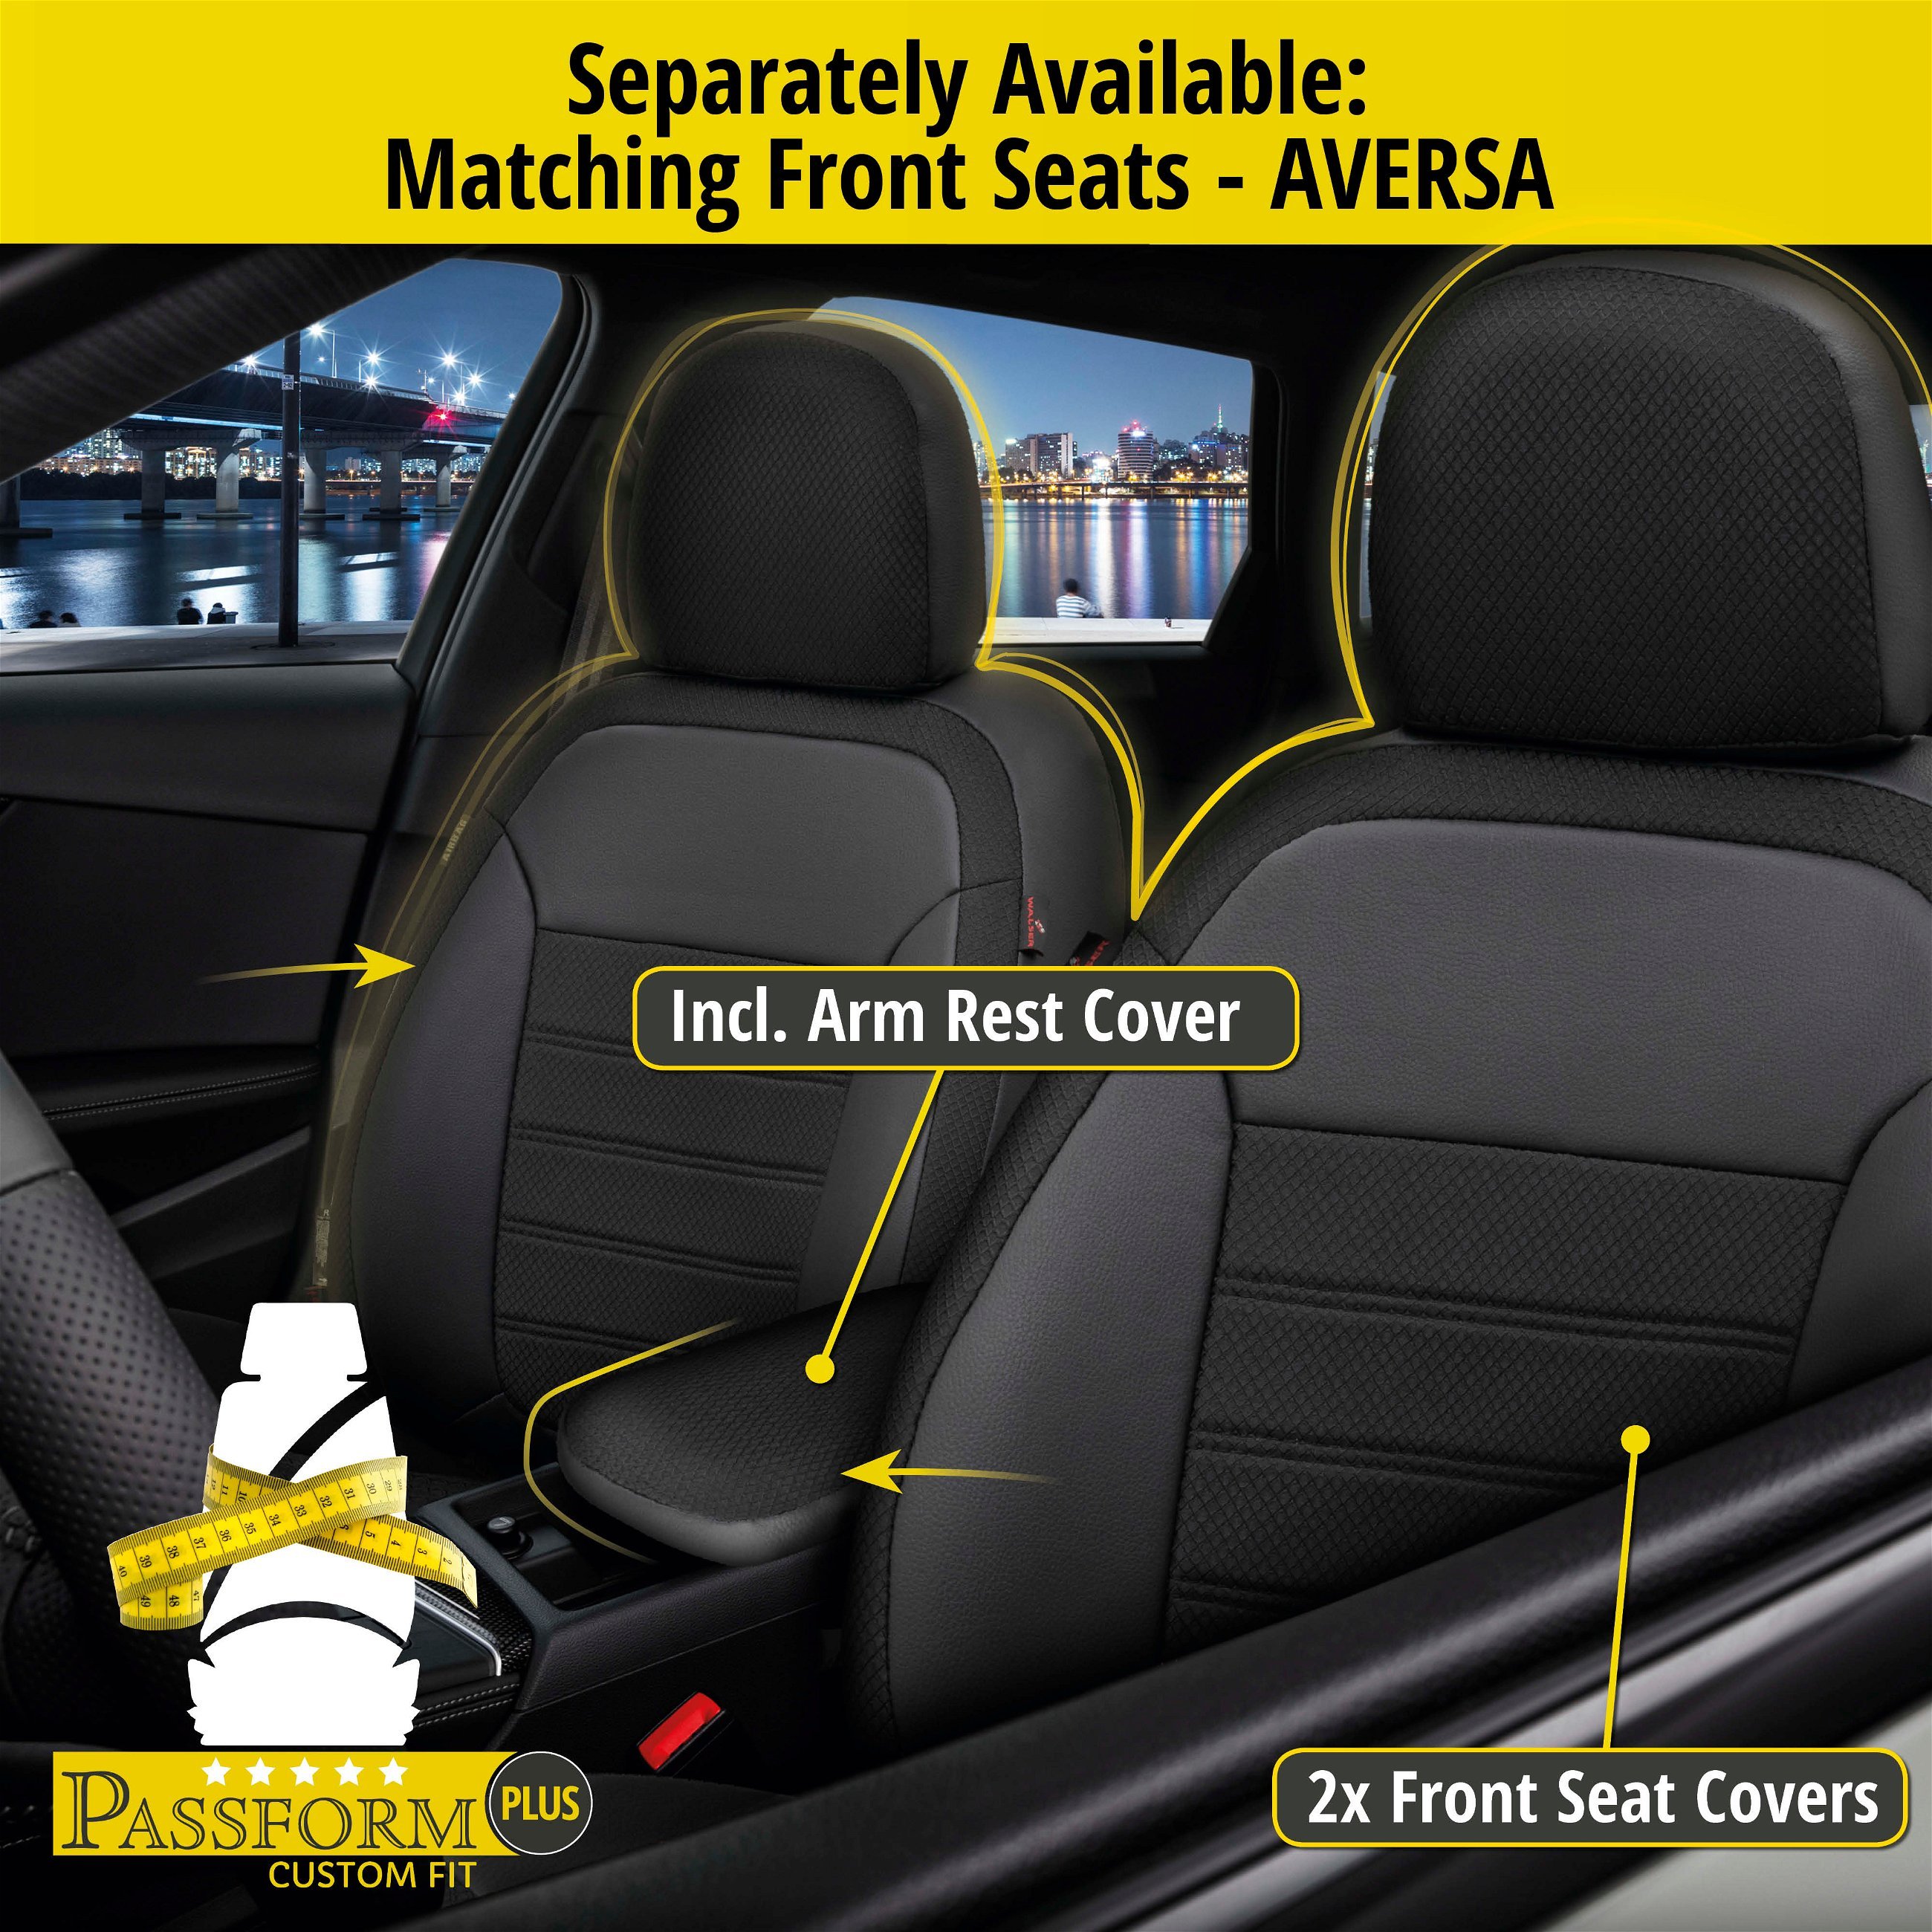 Seat Cover Aversa for Mazda CX-3 (DK) 01/2015-Today, 1 rear seat cover for normal seats